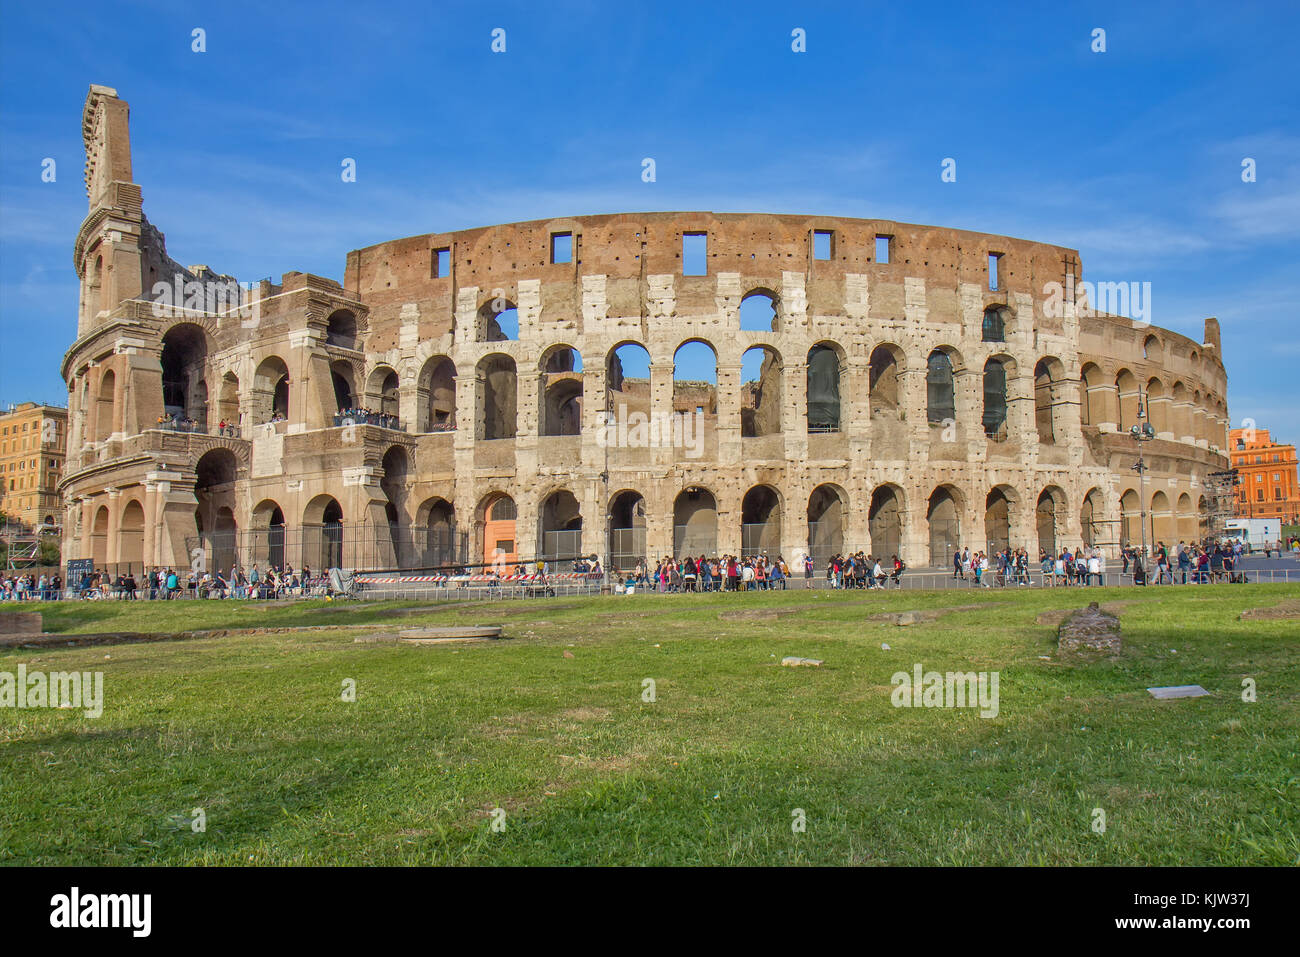 The Colosseum amphiteater in Rome, Italy Stock Photo